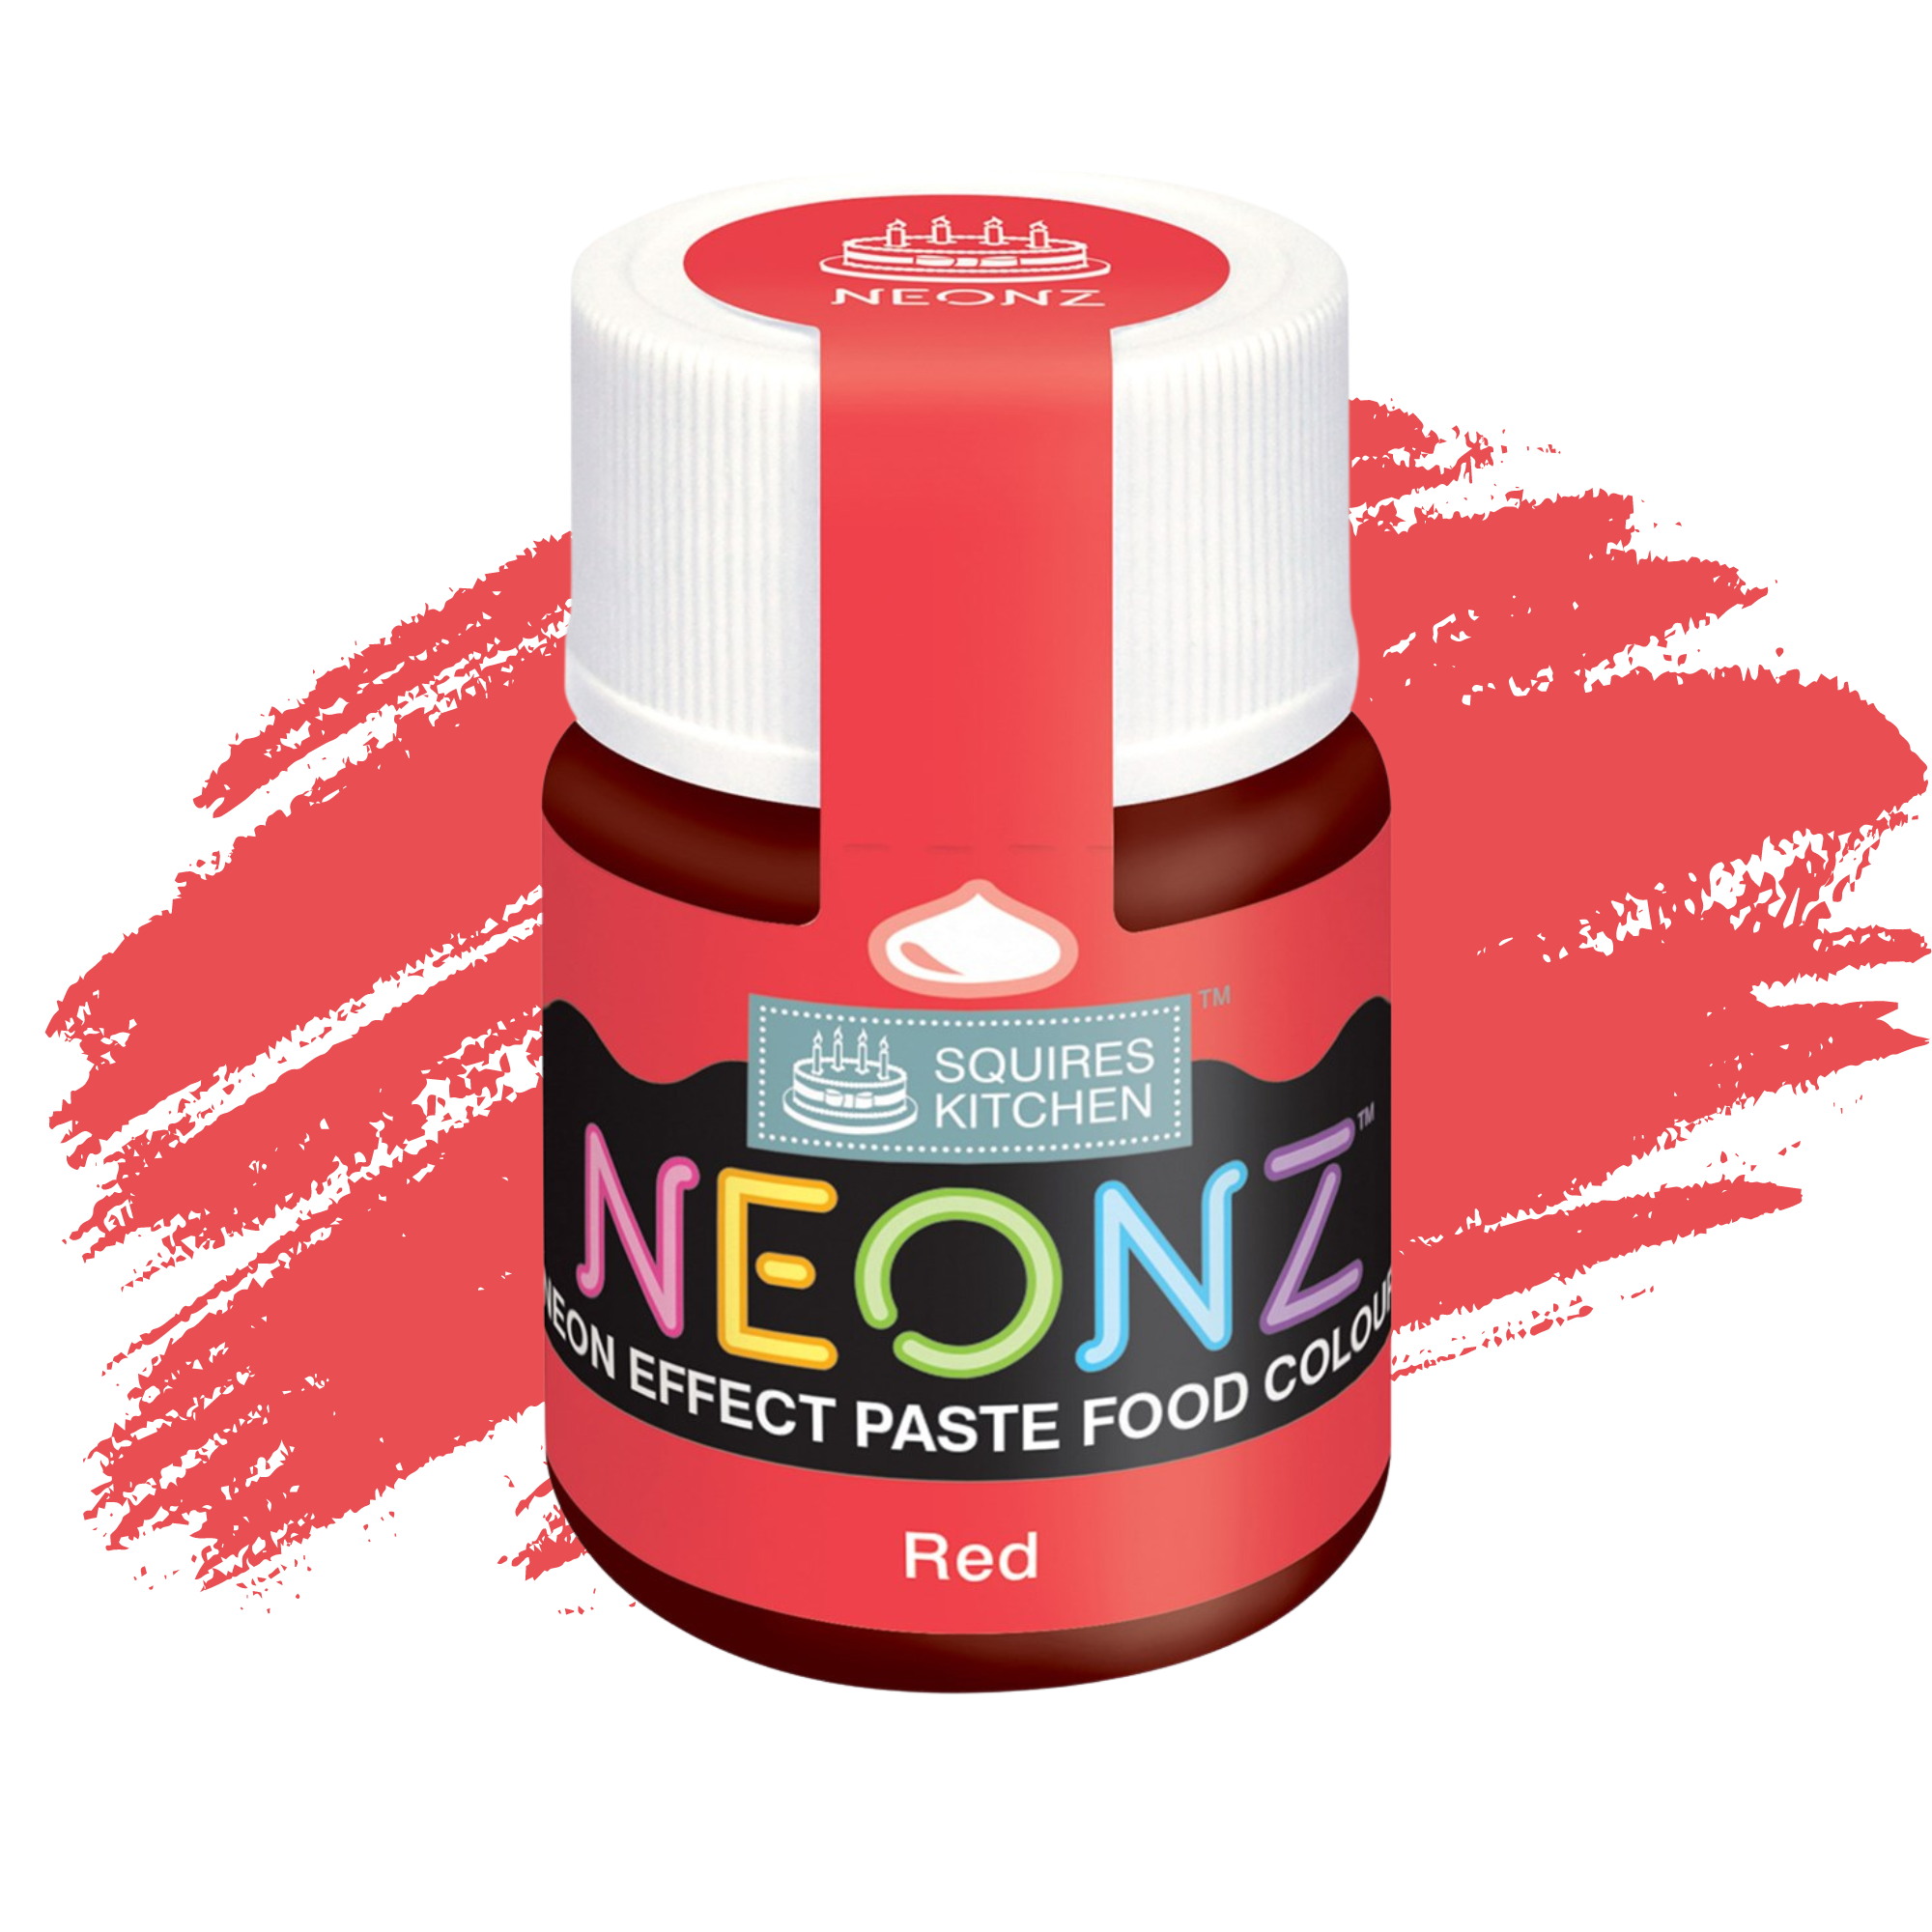 Squires Kitchen Neonz Neon Effect Concentrated Paste Food Colouring - 20g - Red